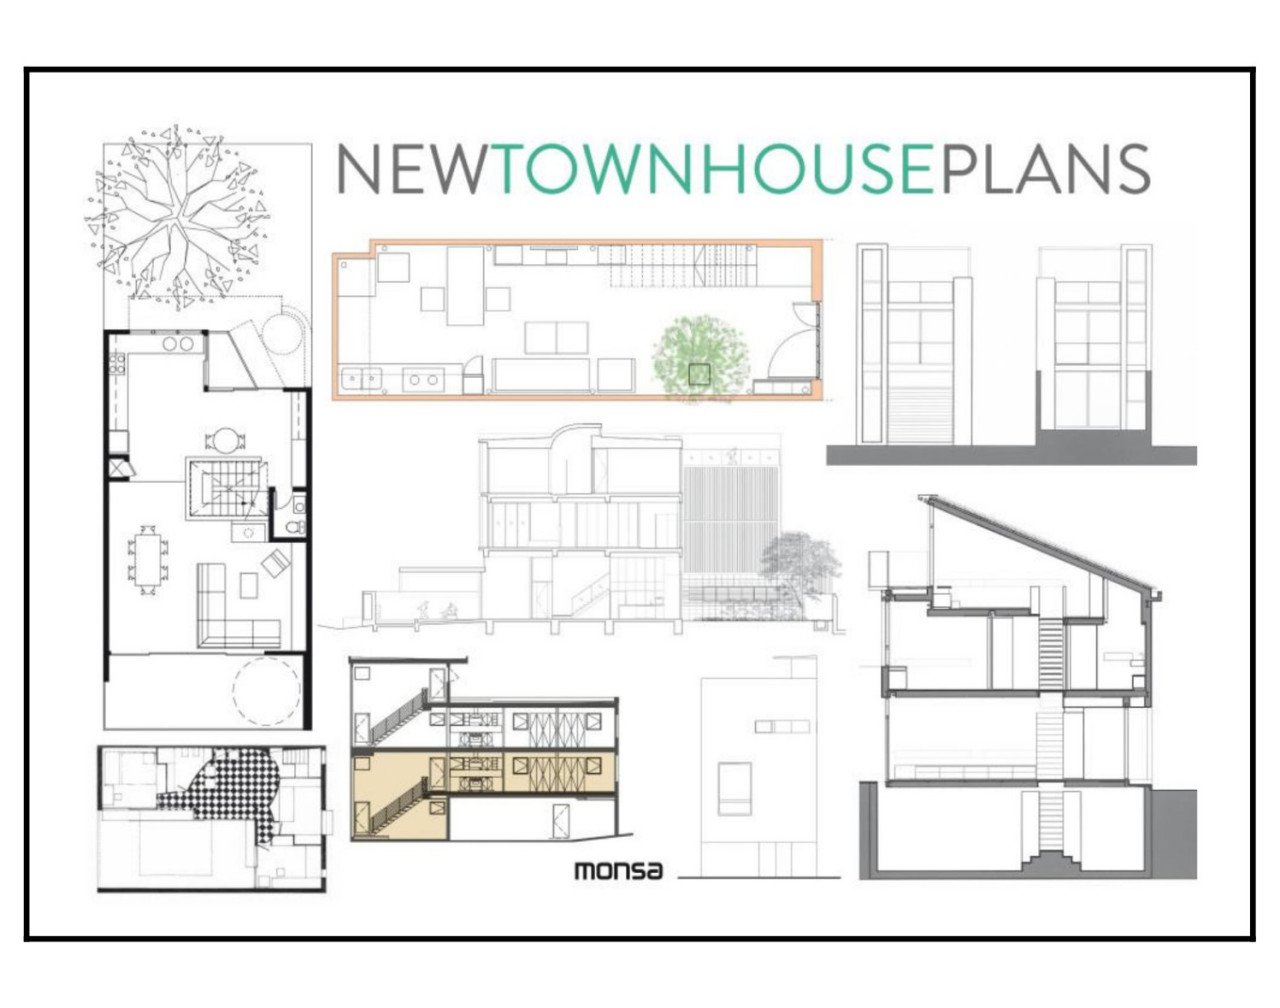 NEW TOWN HOUSE PLANS